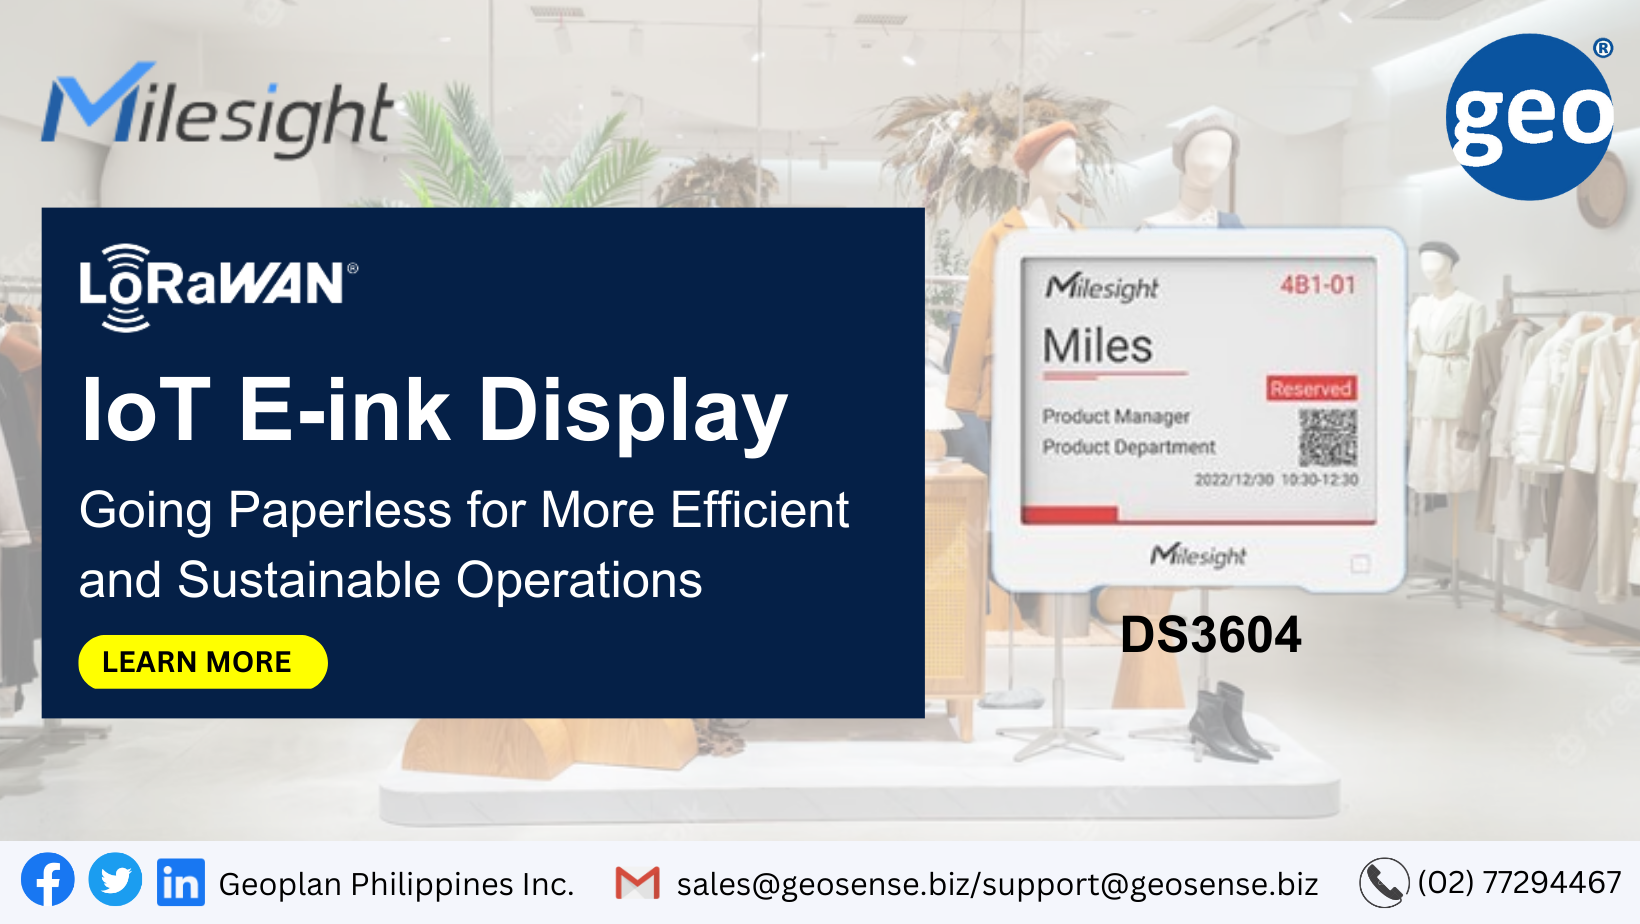 Milesight IoT: E-ink Display DS3604  offers a more efficient and sustainable operations for offices, warehouses, retail stores, hospitals, laboratories and libraries.